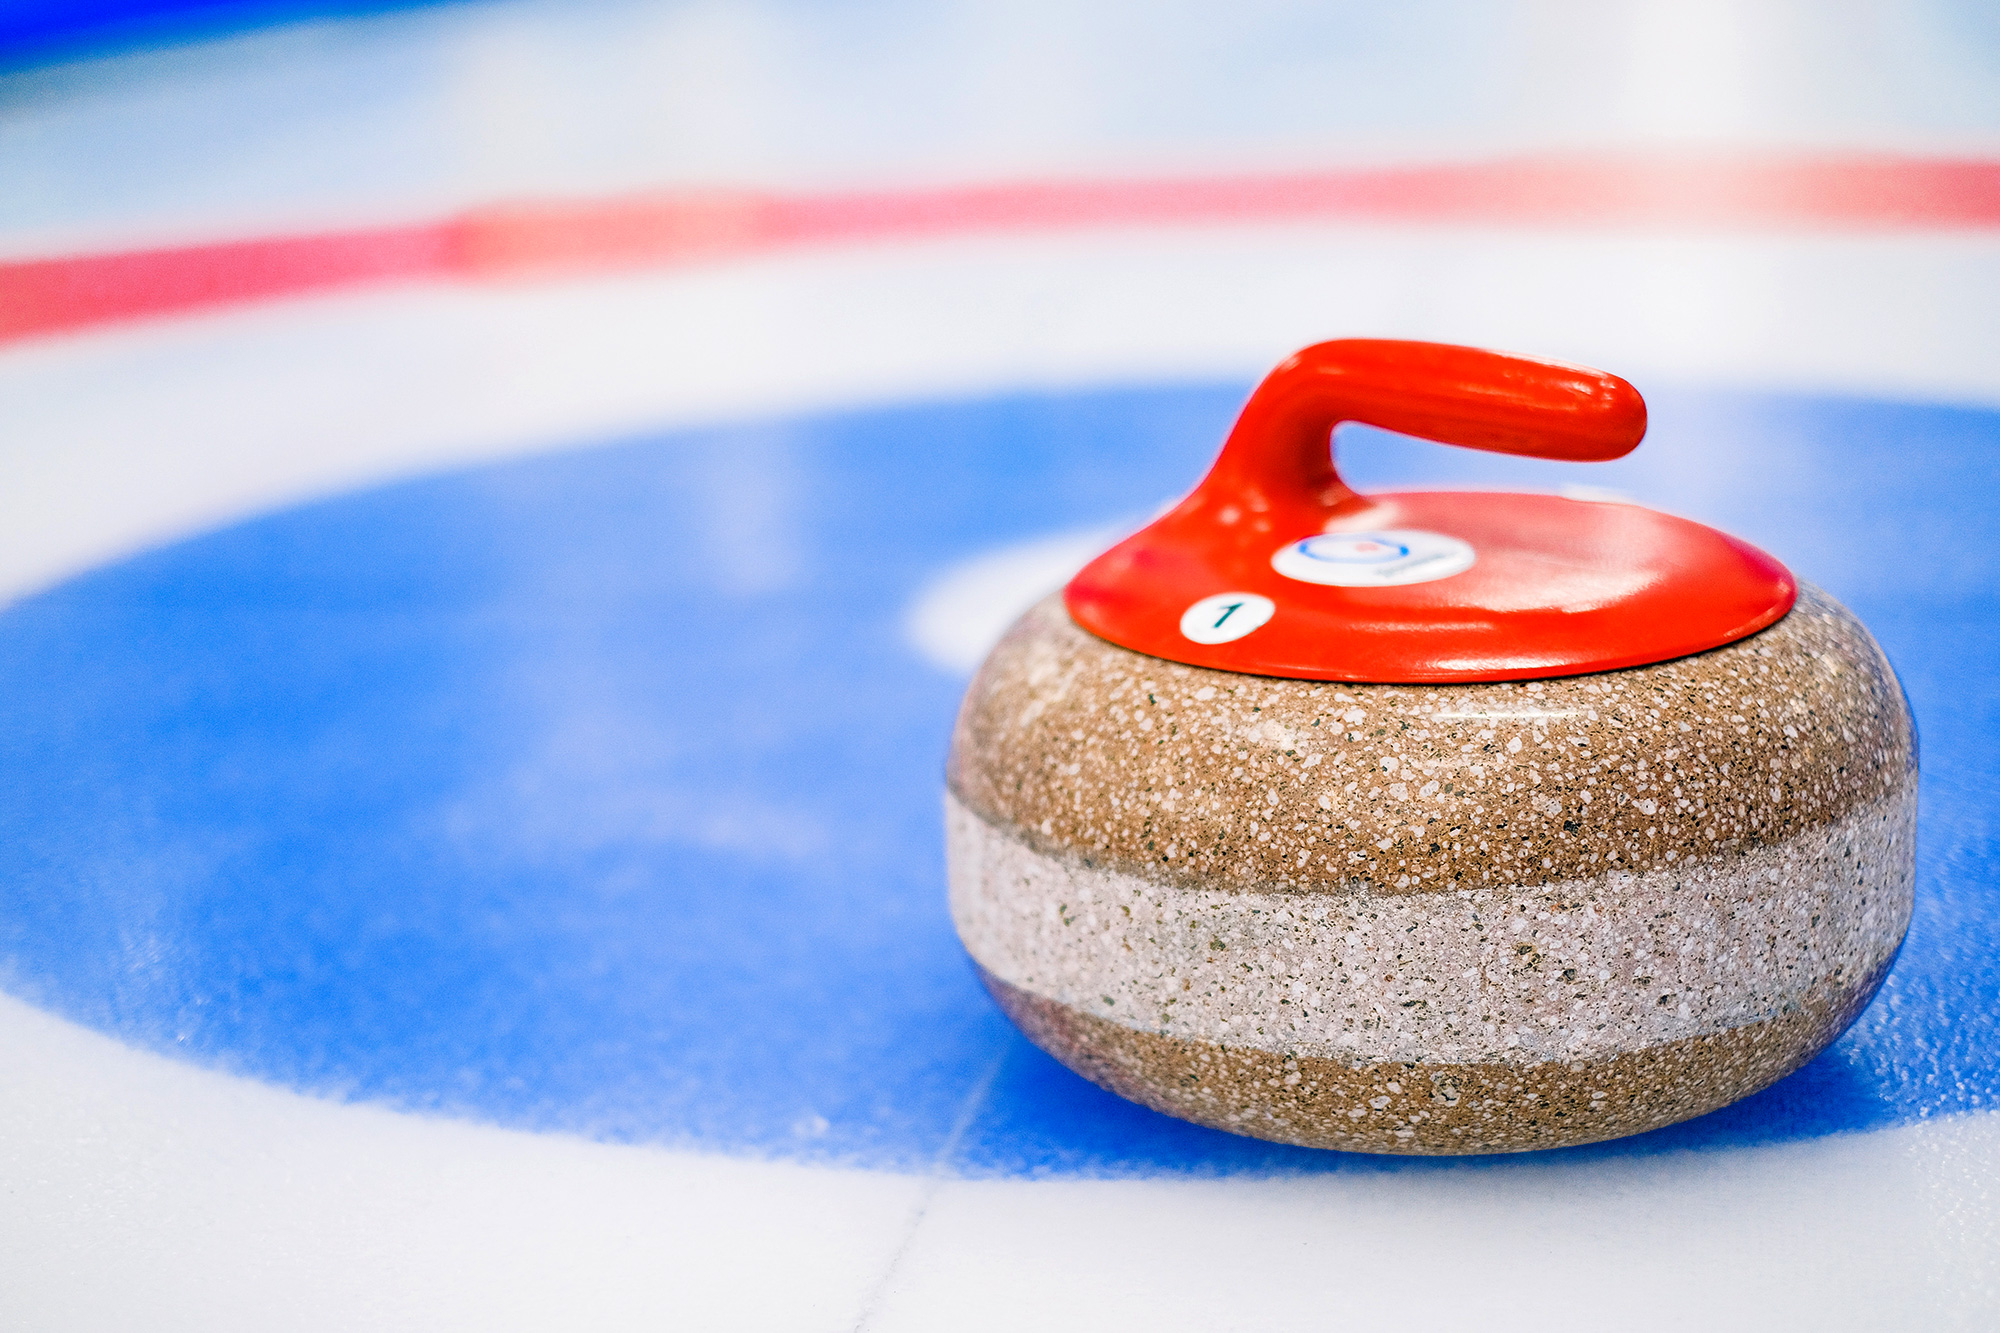 Photo of a curling "stone" and "house" on ice